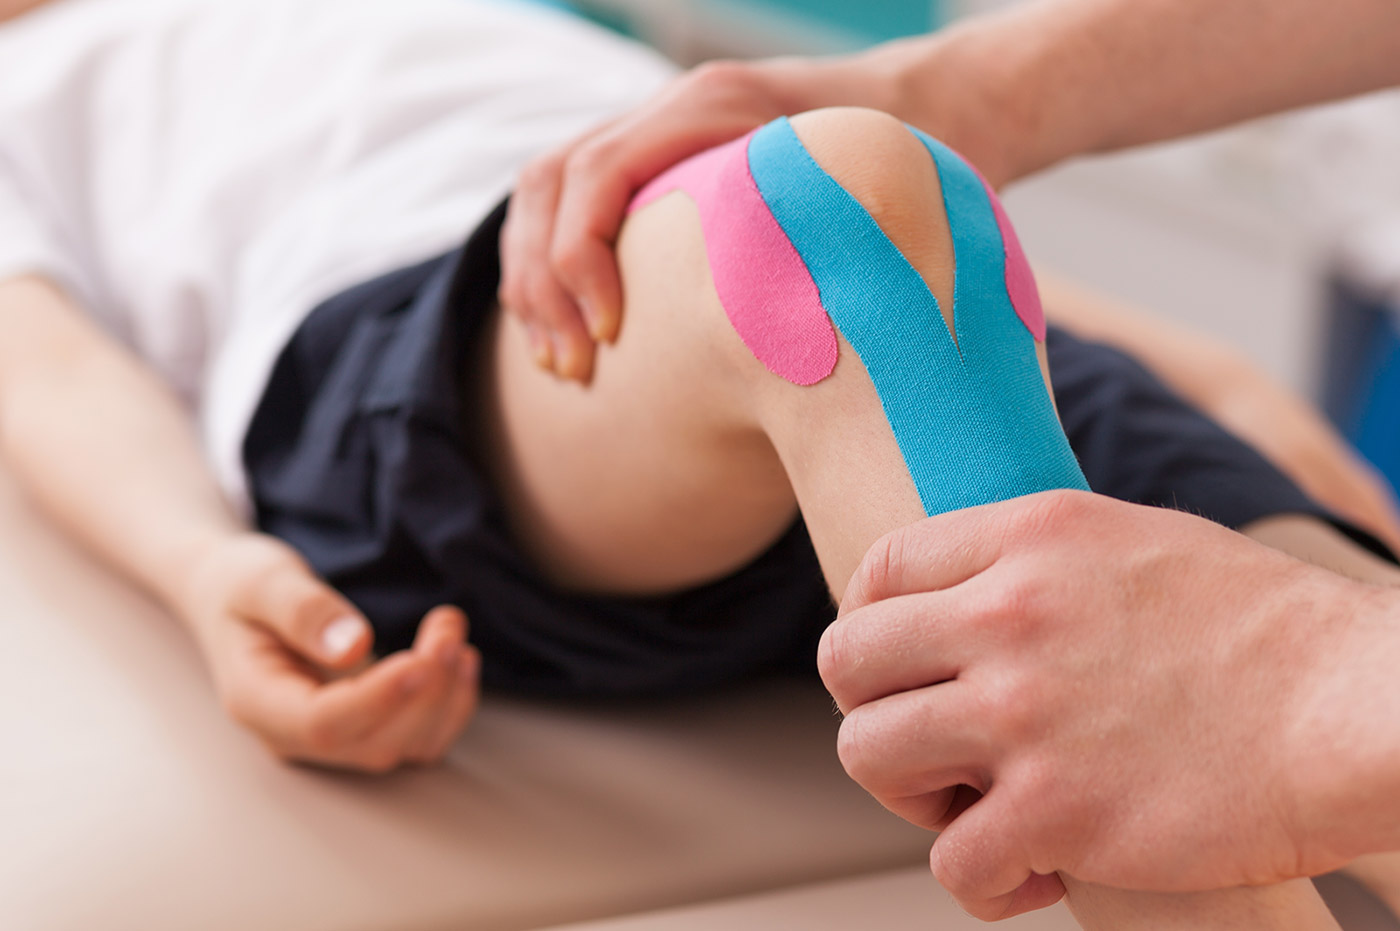 A knee bandaged with medical tape during physical therapy.